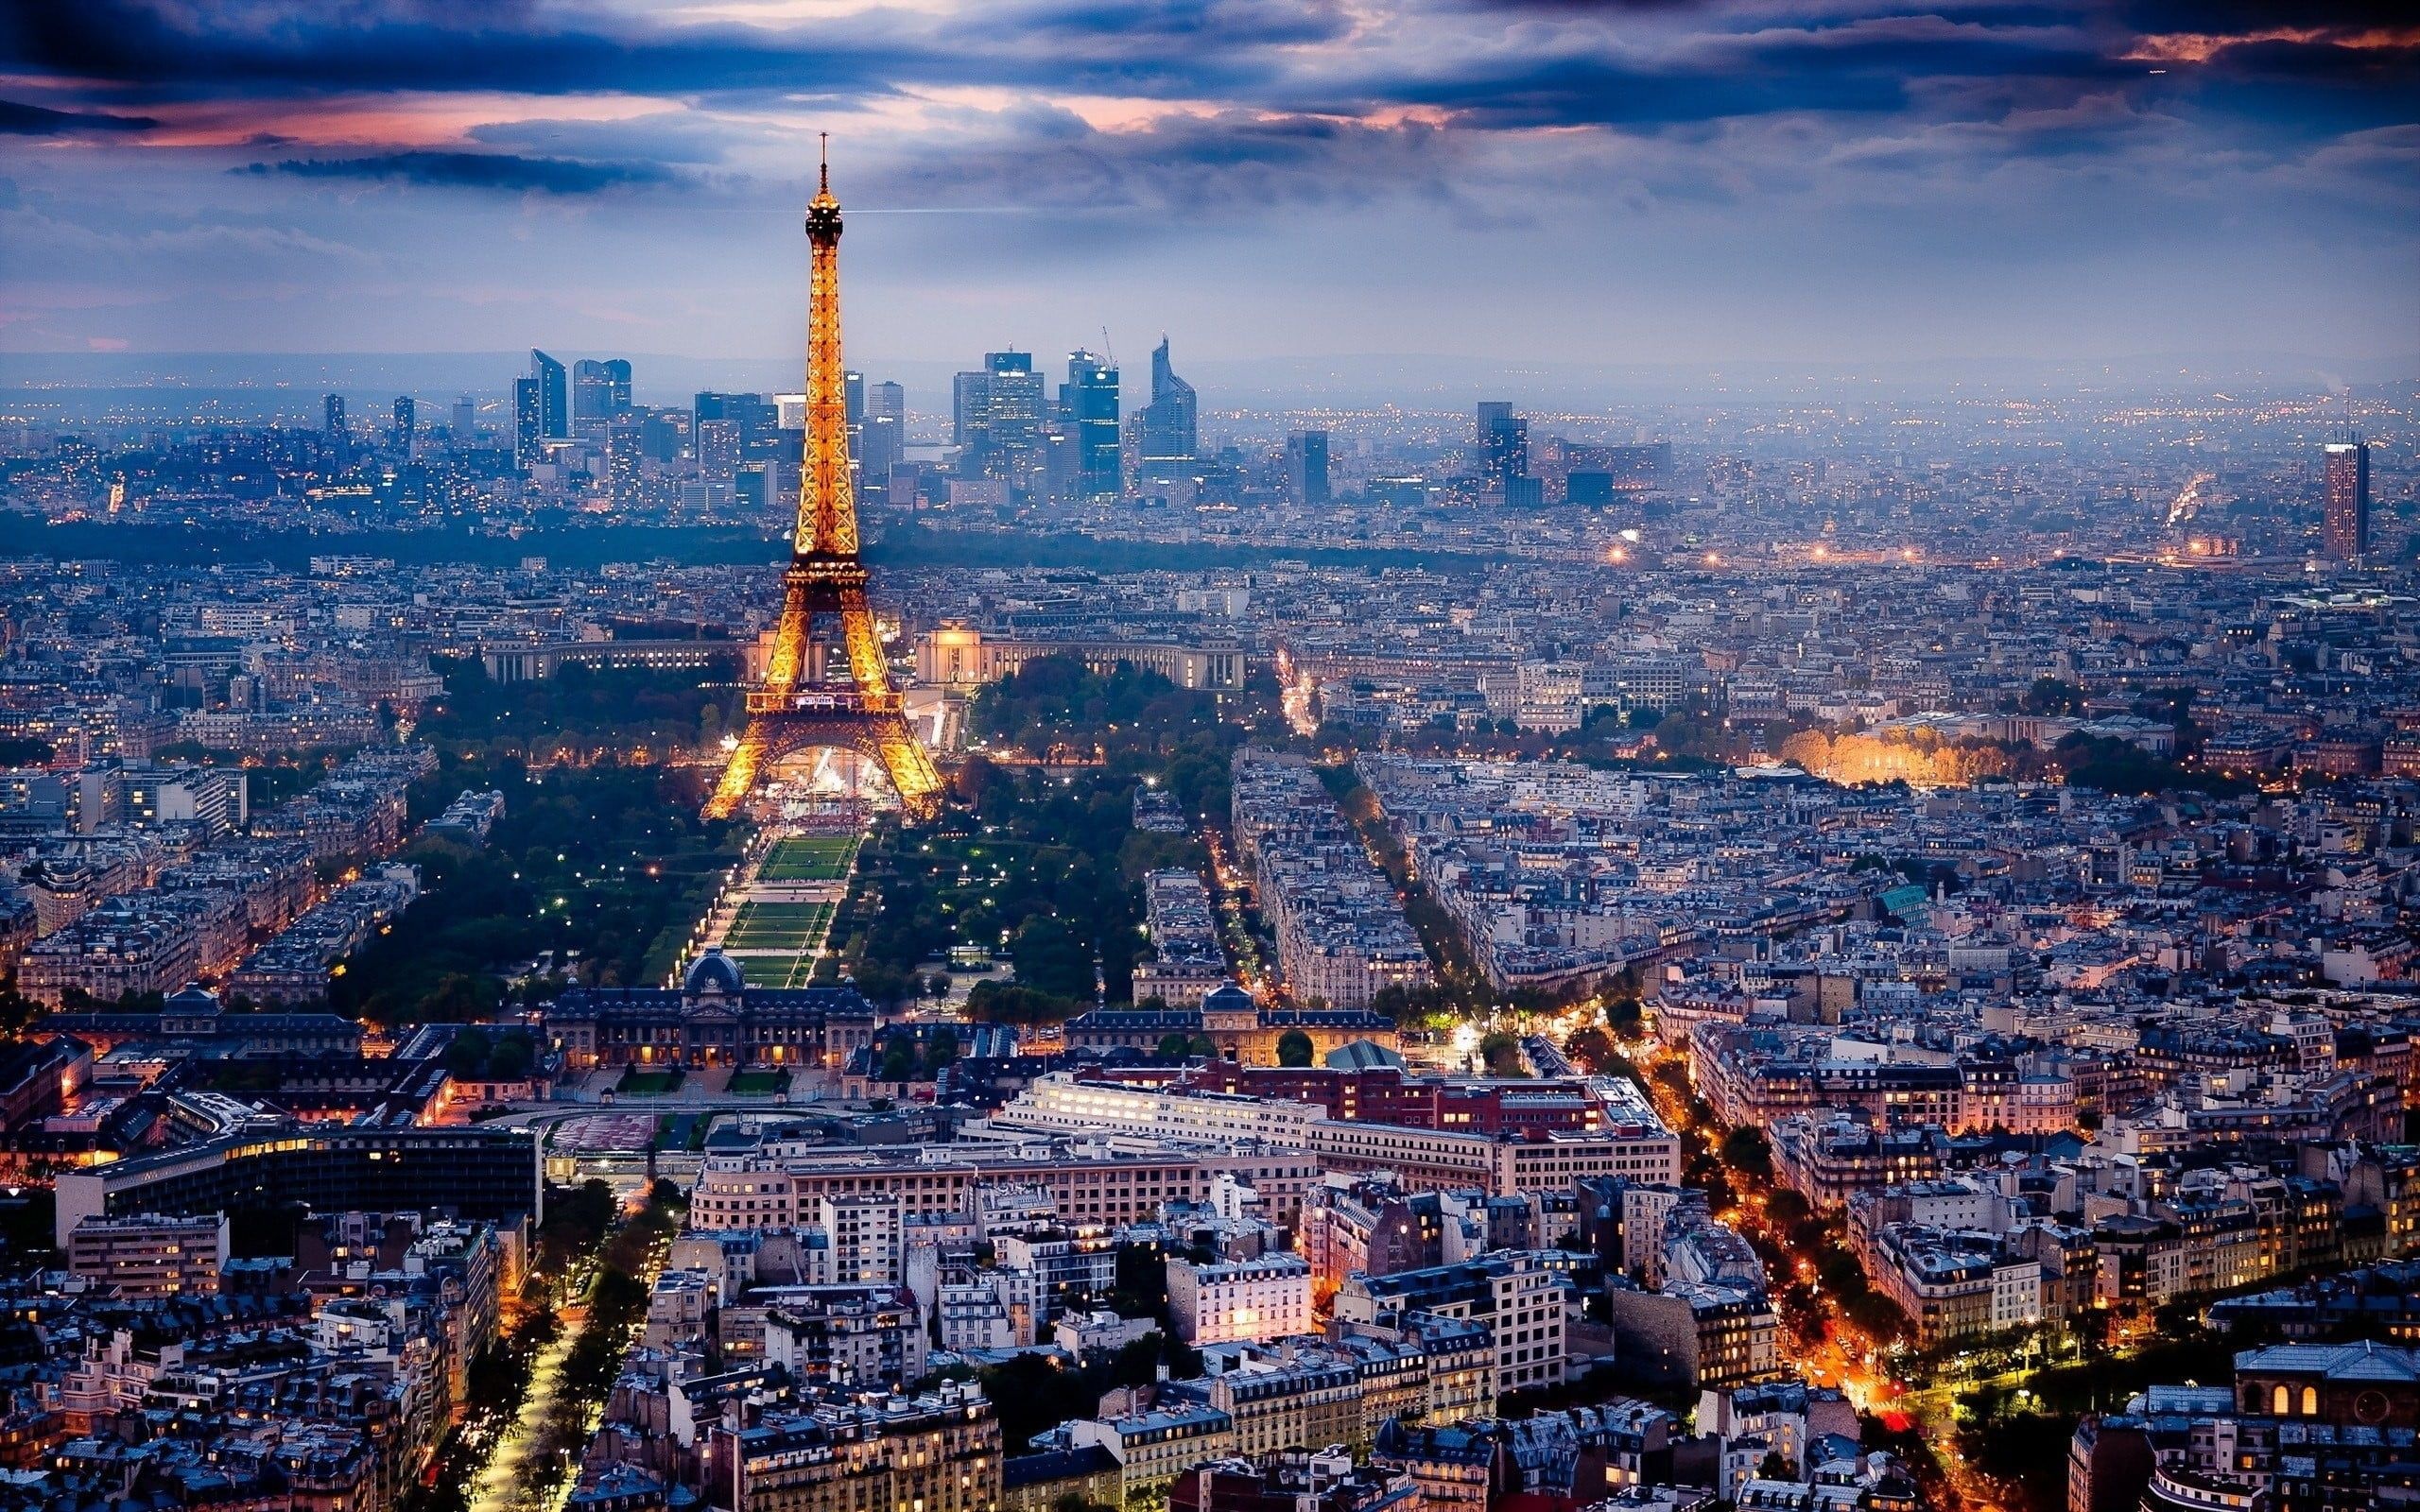 Paris: City lights, The French capital, Cityscape. 2560x1600 HD Wallpaper.